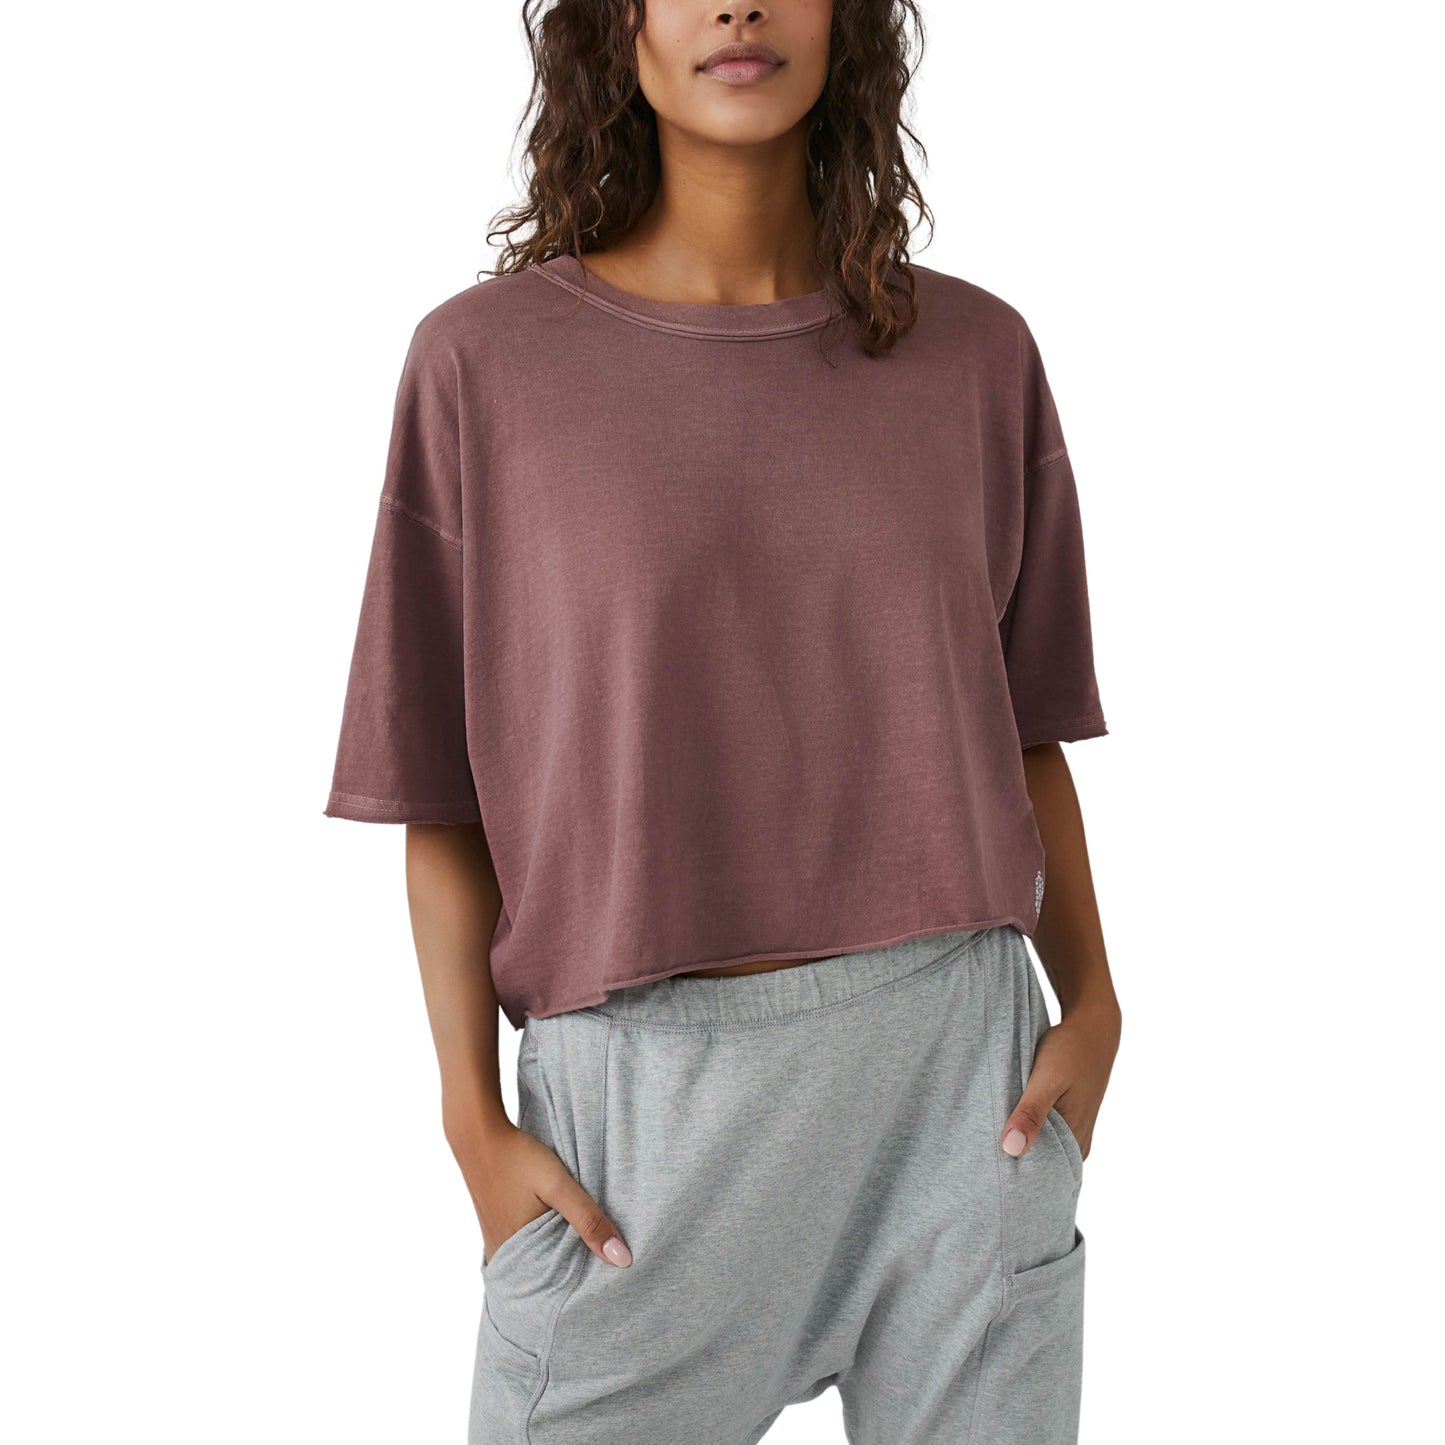 Woman wearing an oversized, maroon Free People Movement Inspire Tee and grey sweatpants, standing with one hand in her pocket.